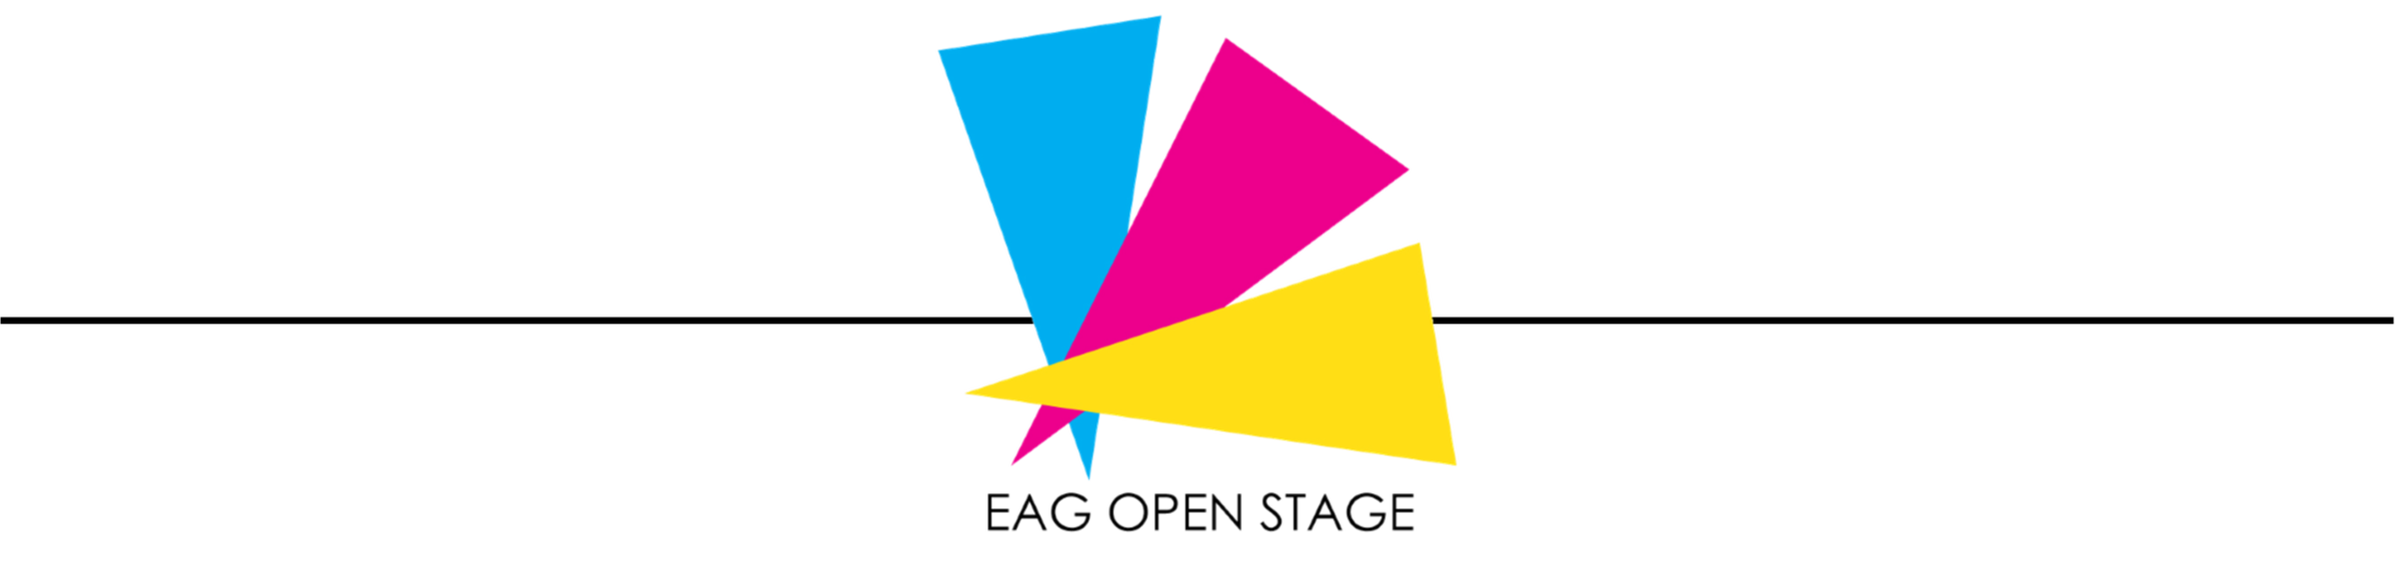 EAG Open Stage banner